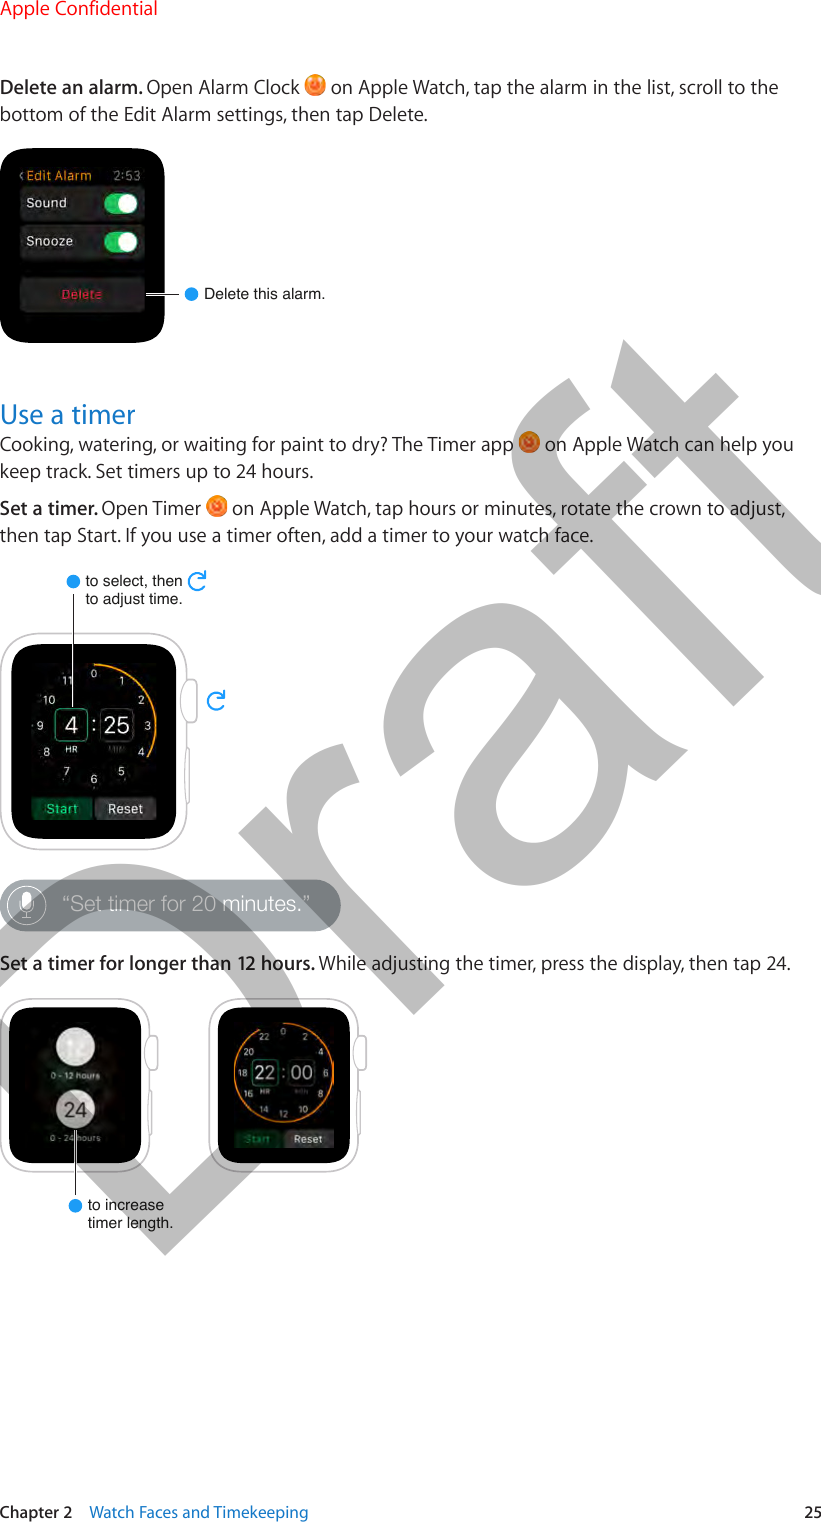 Chapter 2    Watch Faces and Timekeeping  25Delete an alarm. Open Alarm Clock   on Apple Watch, tap the alarm in the list, scroll to the bottom of the Edit Alarm settings, then tap Delete.Delete this alarm.Use a timerCooking, watering, or waiting for paint to dry? The Timer app   on Apple Watch can help you keep track. Set timers up to 24 hours.Set a timer. Open Timer   on Apple Watch, tap hours or minutes, rotate the crown to adjust, then tap Start. If you use a timer often, add a timer to your watch face.to select, thento adjust time.“Set timer for 20 minutes.”Set a timer for longer than 12 hours. While adjusting the timer, press the display, then tap 24.to increasetimer length.Apple Confidential  100% resize factorDraft